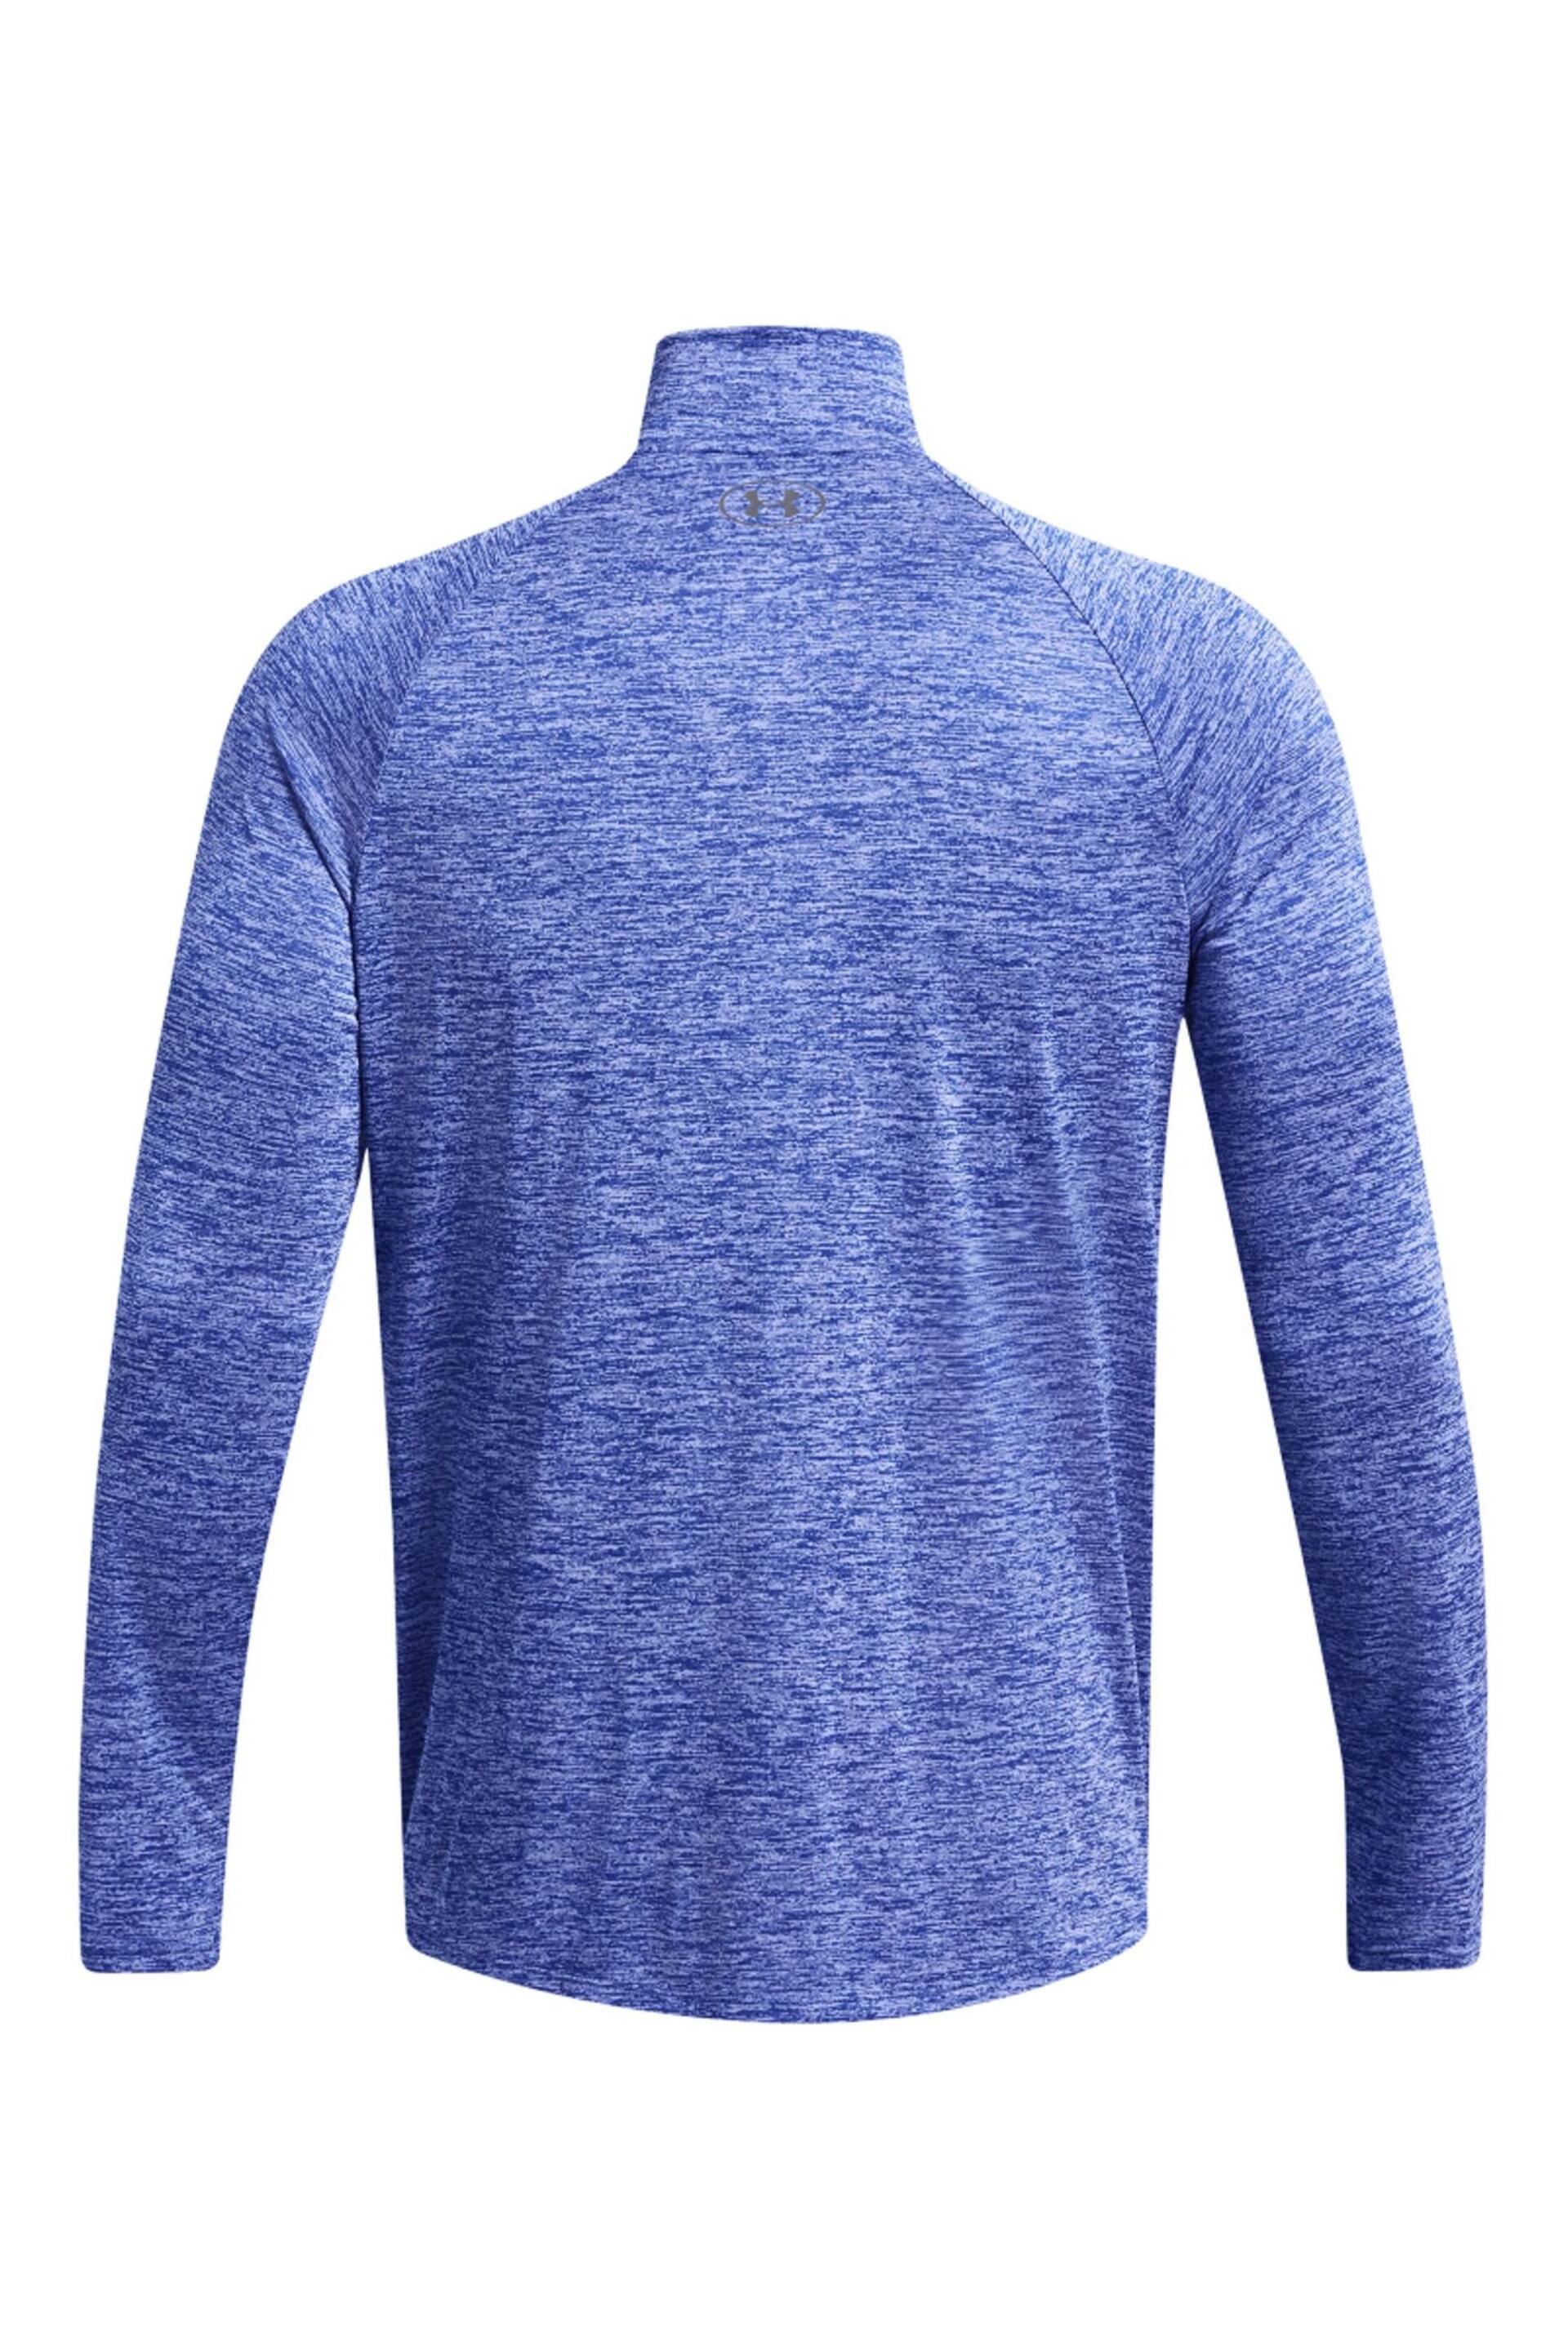 Under Armour Bright Blue Under Armour Bright Blue Tech 2.0 1/2 Zip Top - Image 5 of 6